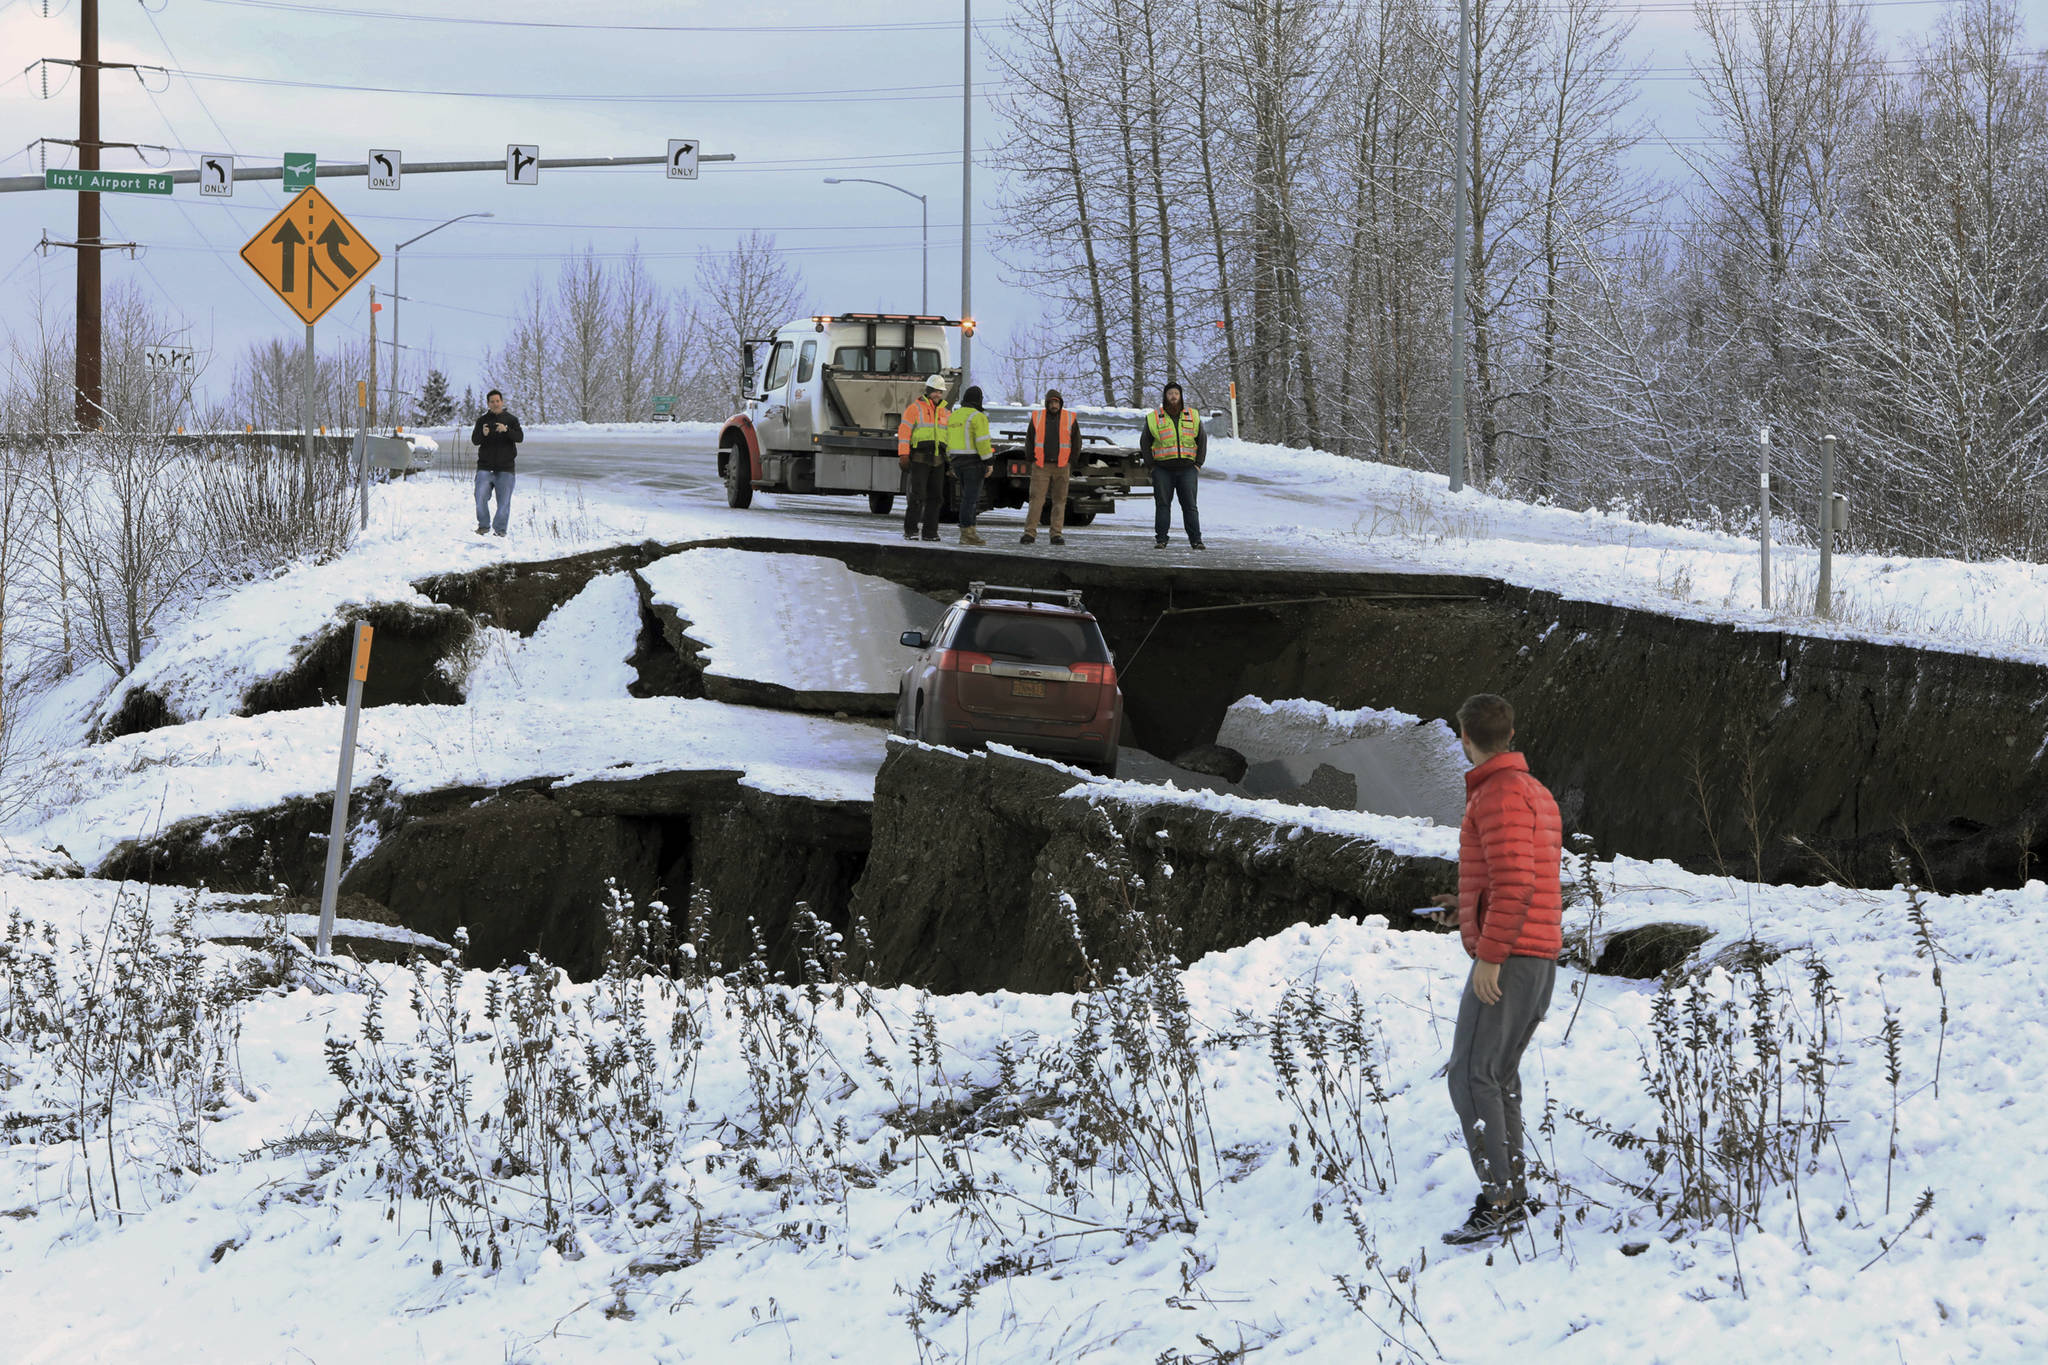 A car belonging to Homer resident Tom Sulczynski is trapped on a collapsed section of the offramp of Minnesota Drive in Anchorage, Friday, Nov. 30, 2018. Sulczynski and passenger Bekah Taylor escaped the car without injury. Back-to-back earthquakes measuring 7.0 and 5.8 rocked buildings and buckled roads Friday morning in Anchorage, prompting people to run from their offices or seek shelter under office desks, while a tsunami warning had some seeking higher ground. (AP Photo/Dan Joling)